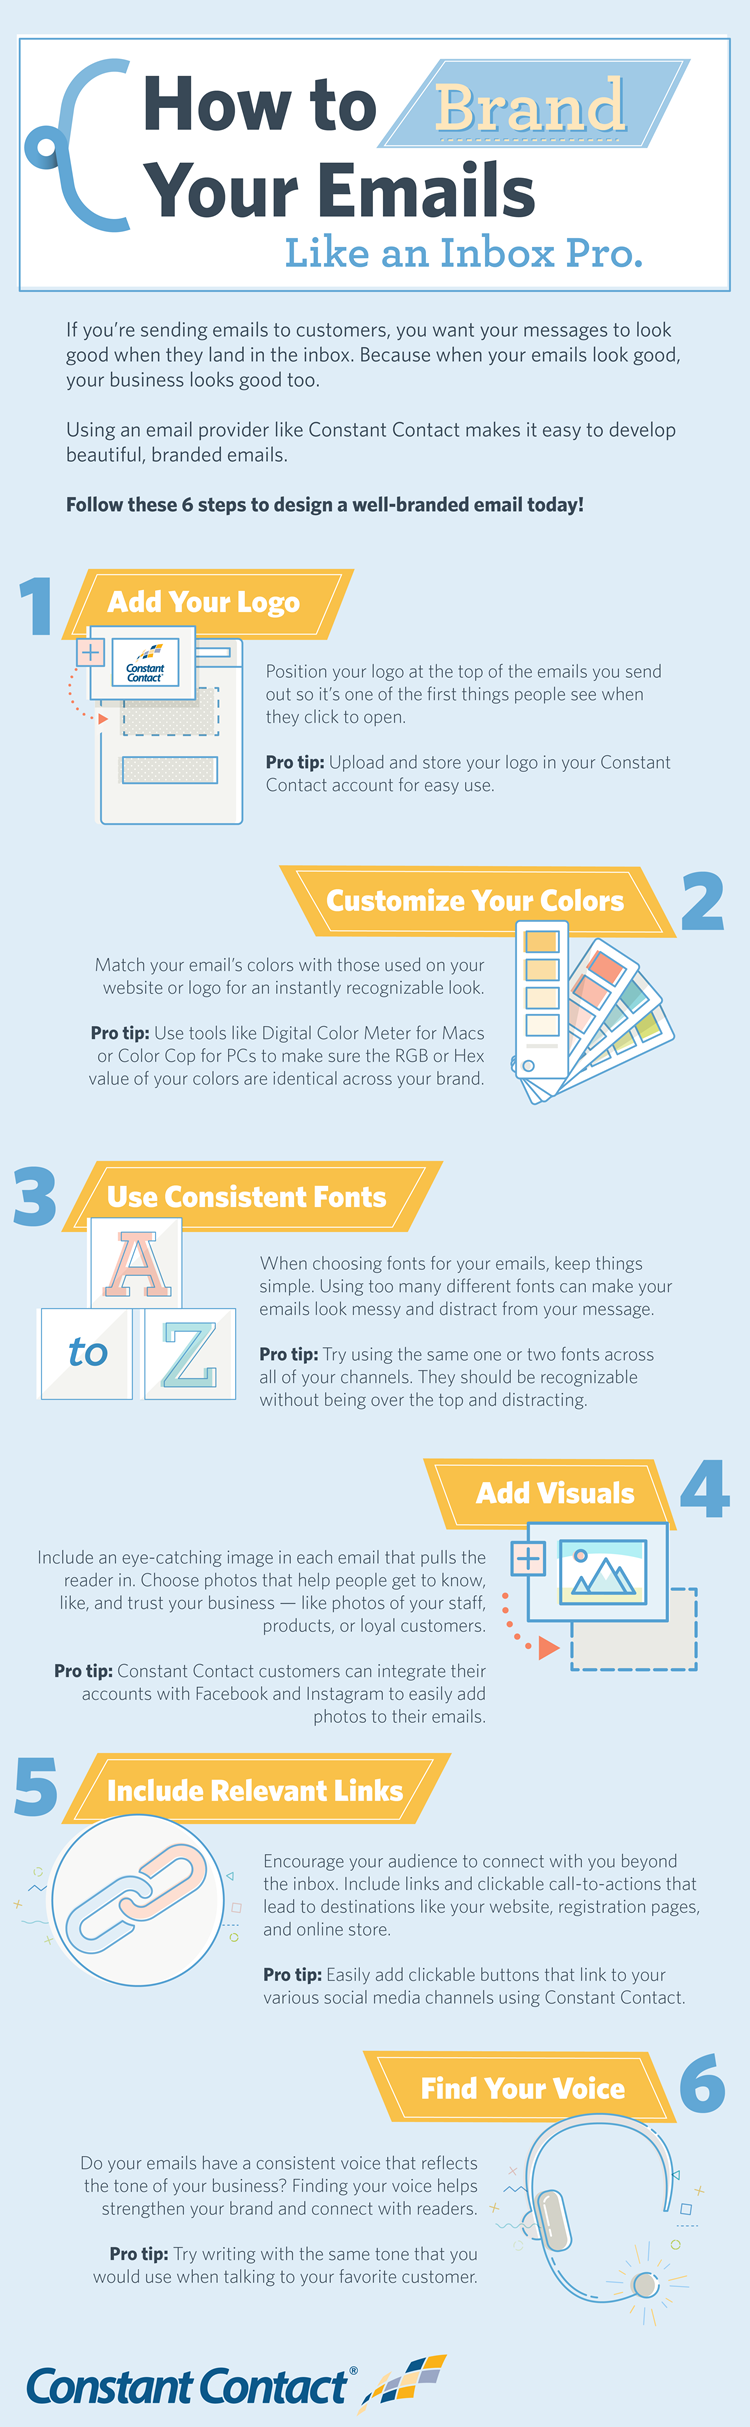 email-branding-infographic